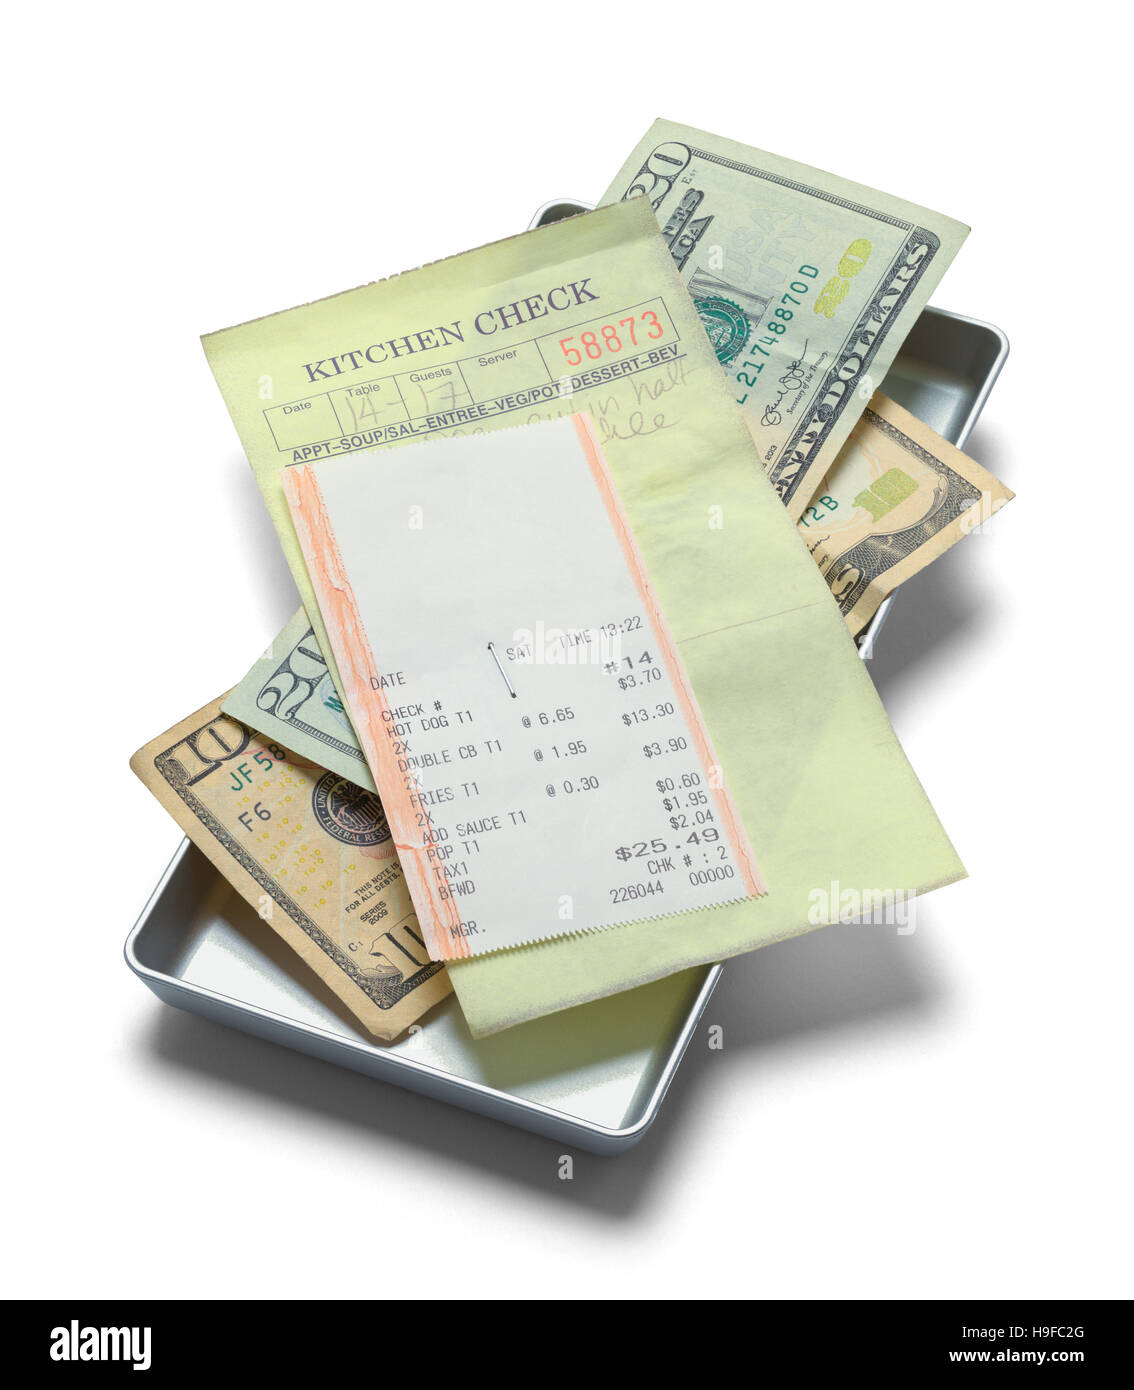 Receipt Tray with Check and Money Isolated on White Background. Stock Photo